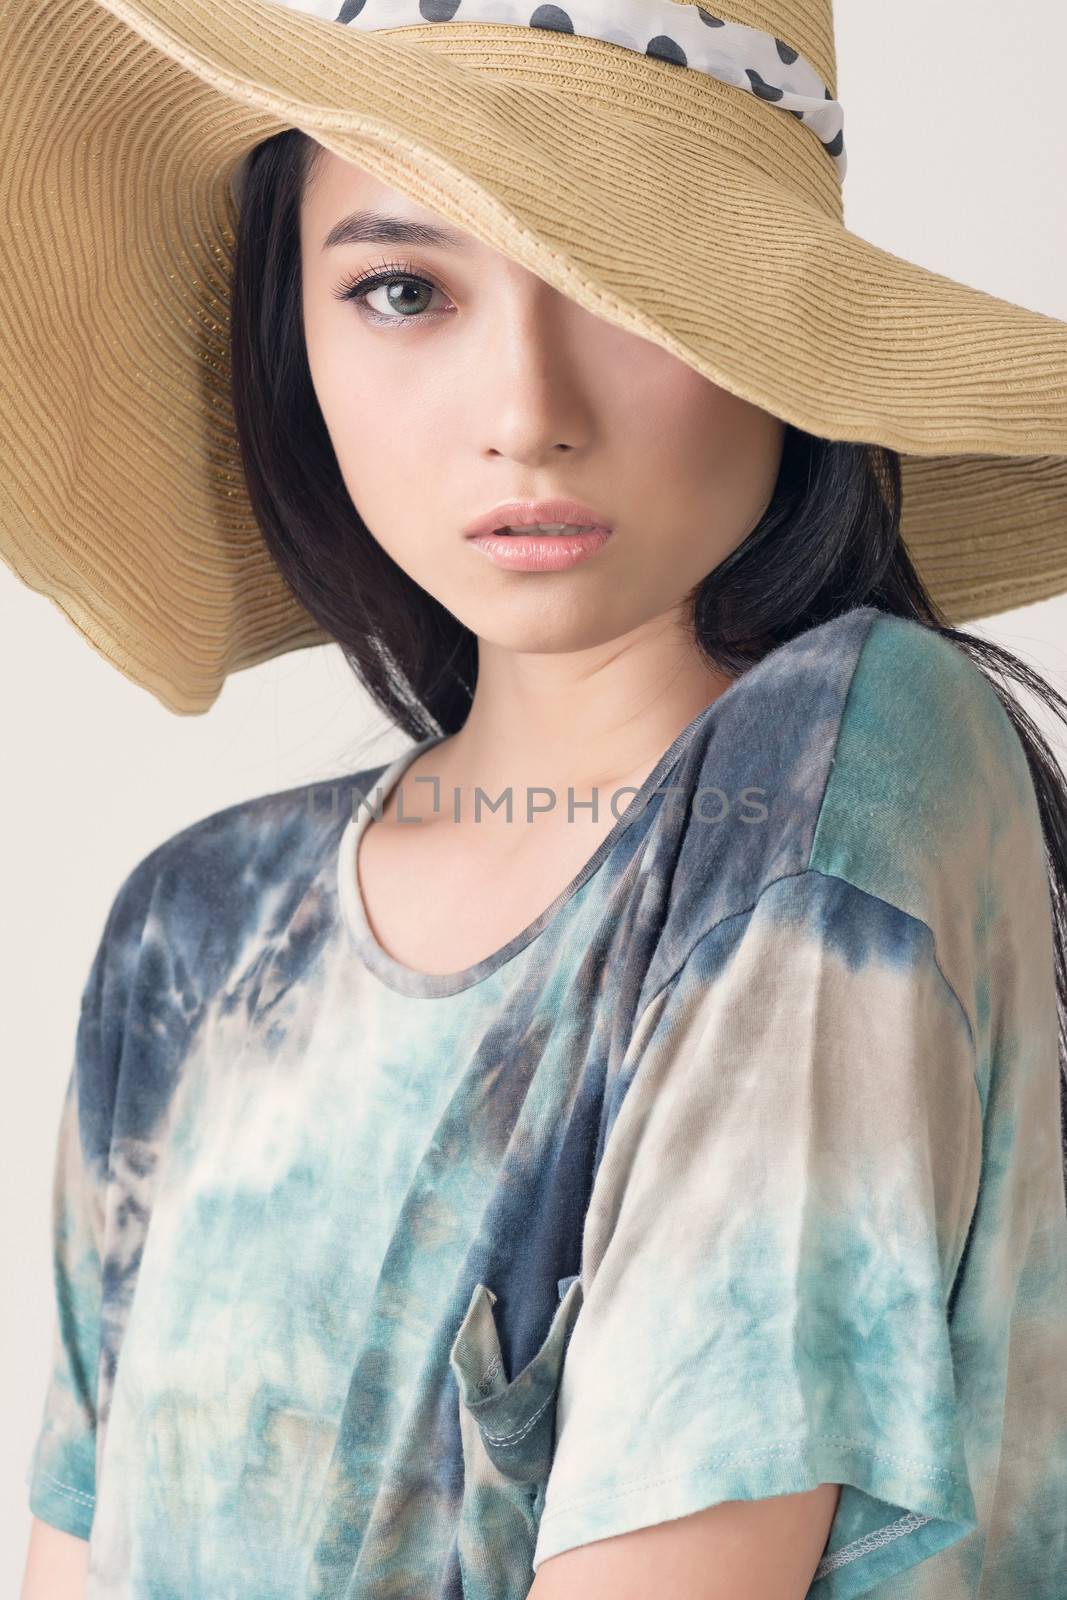 Glamour of Asian beauty with hat, closeup portrait.